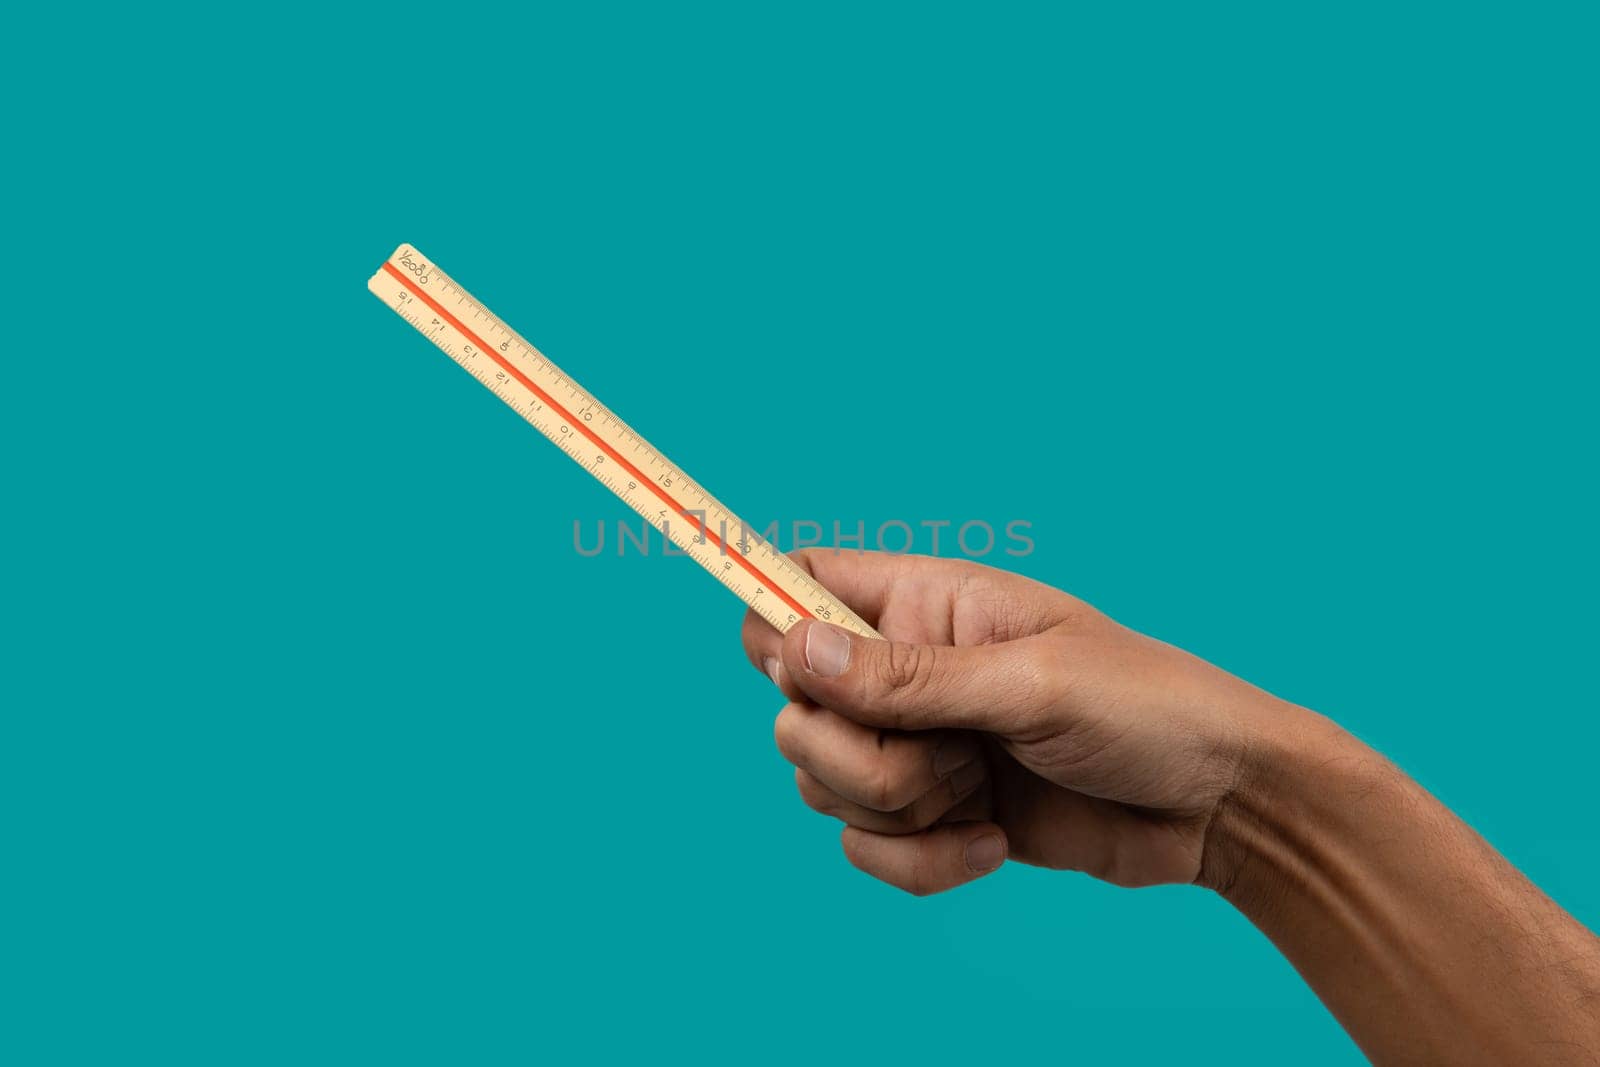 Black male hand holding a vintage ruler isolated on turquoise background. by TropicalNinjaStudio